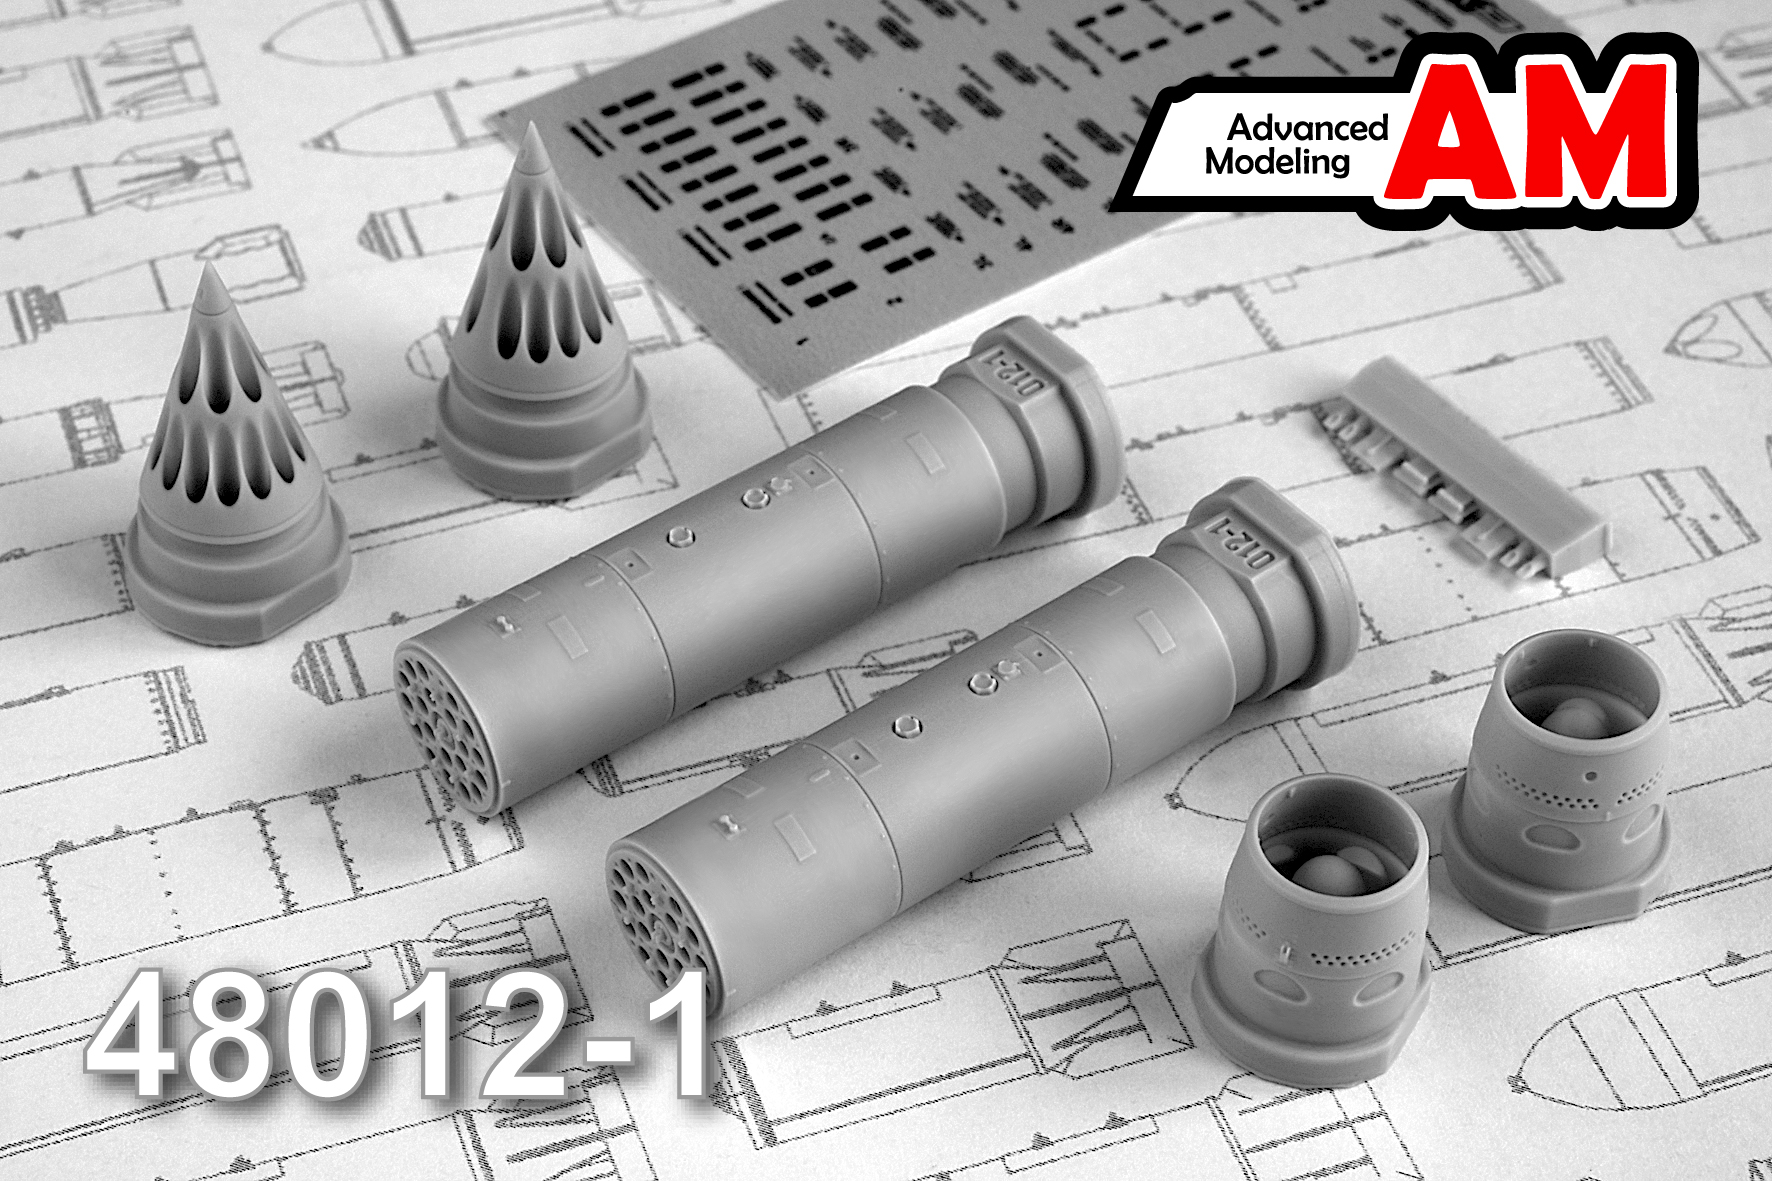 Additions (3D resin printing) 1/48 B-8M-1 Block of unguided aviation missiles (Advanced Modeling) 